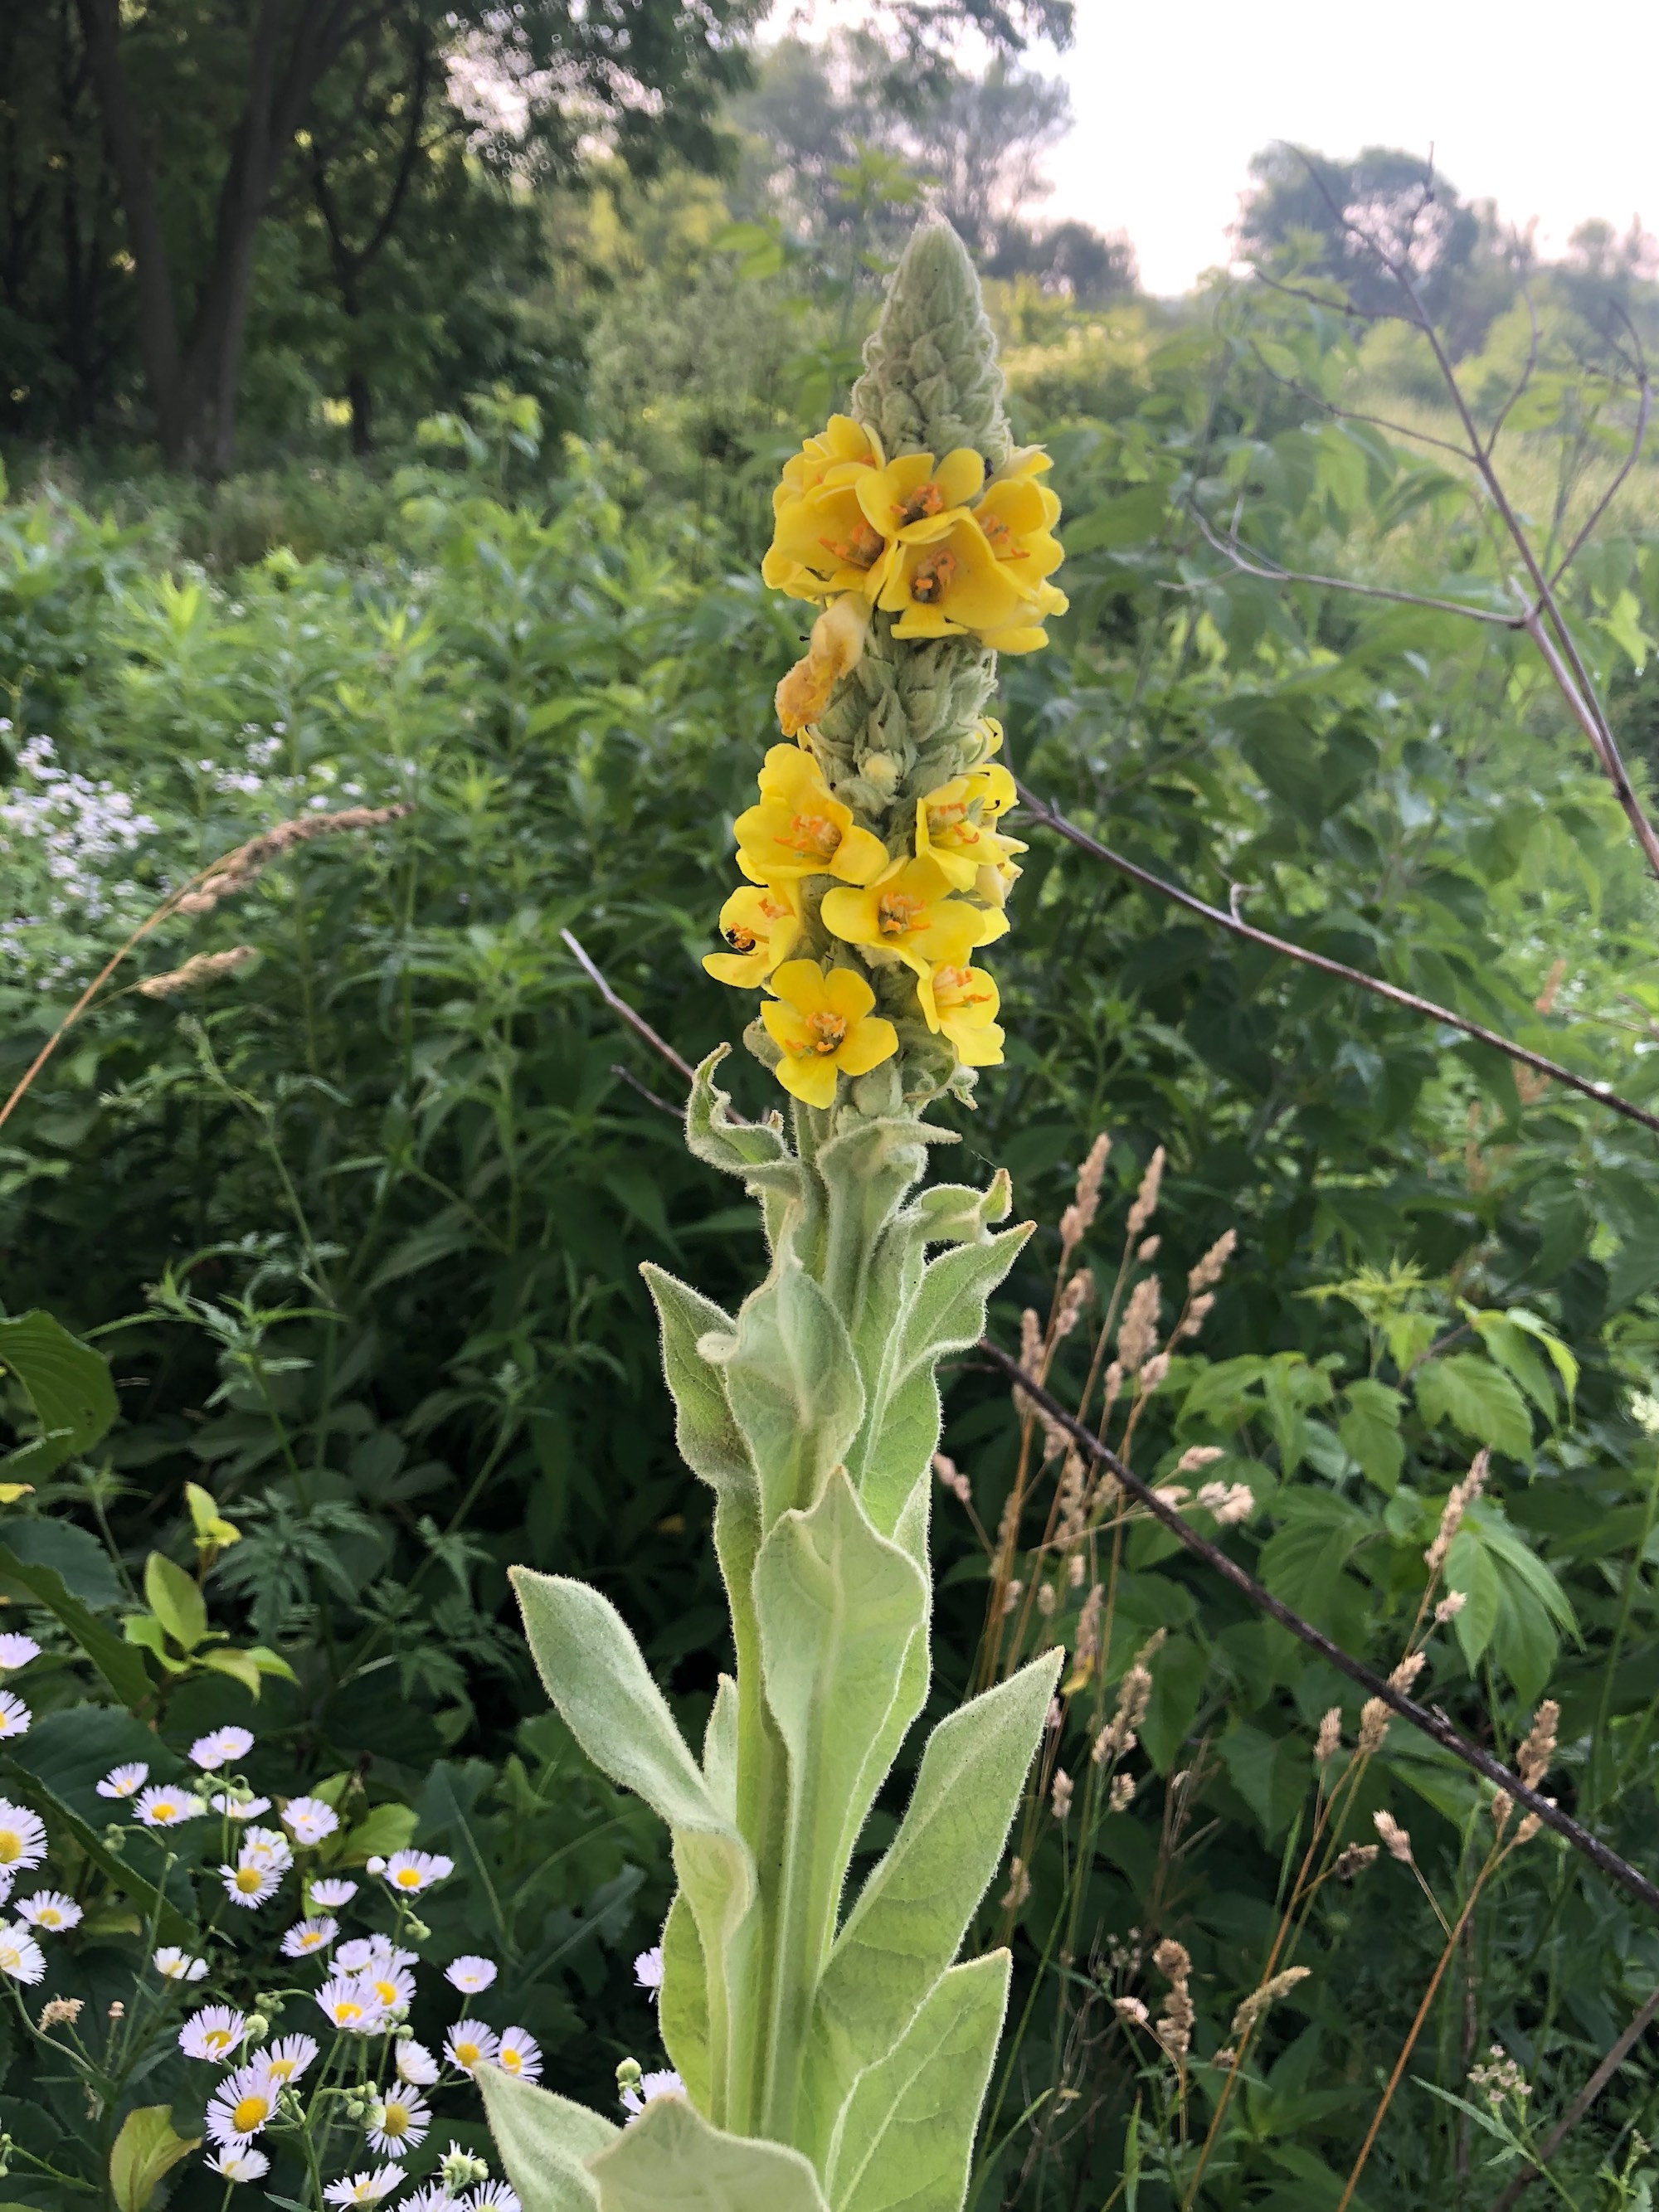 Common Mullein on shore of Marion Dunn Pond on June 28, 2020.